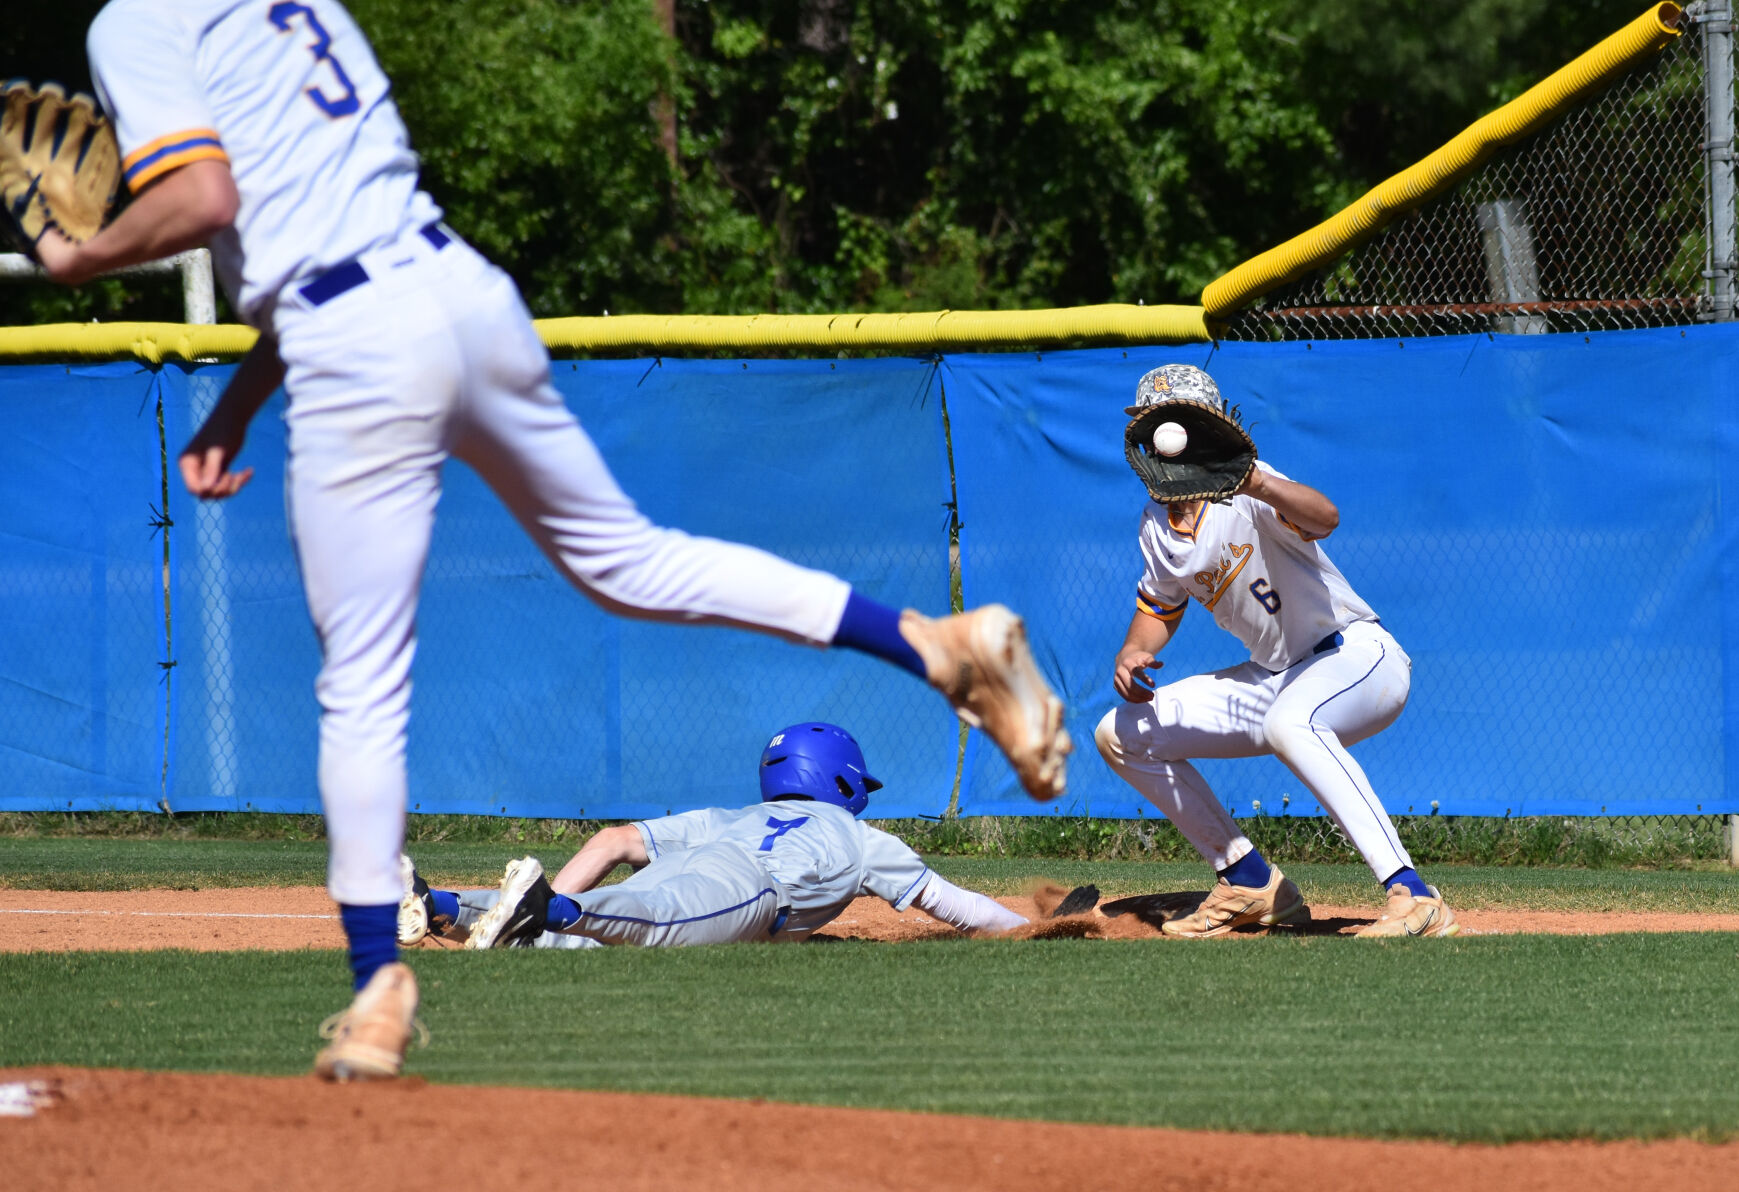 Mandeville Dominates St. Paul’s District Showdown with 12-0 Win and Bizarre Triple Play Drama